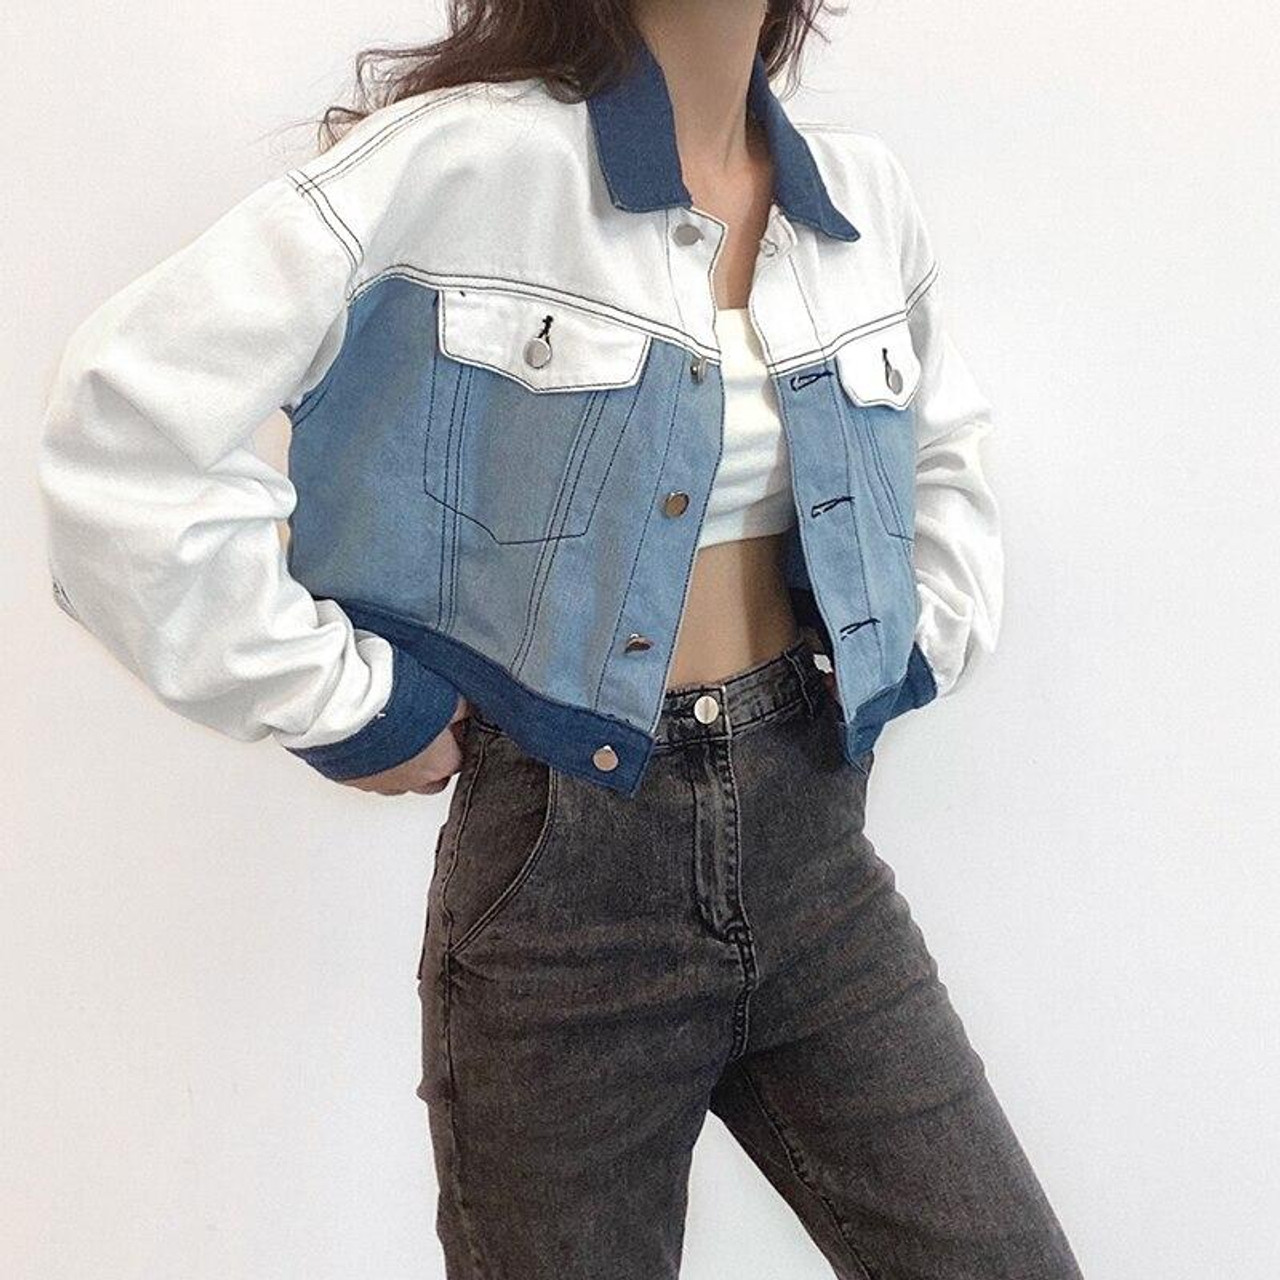 INDIE AESTHETIC DOUBLE POCKET COLLARED BLUE JEAN JACKET - Cosmique